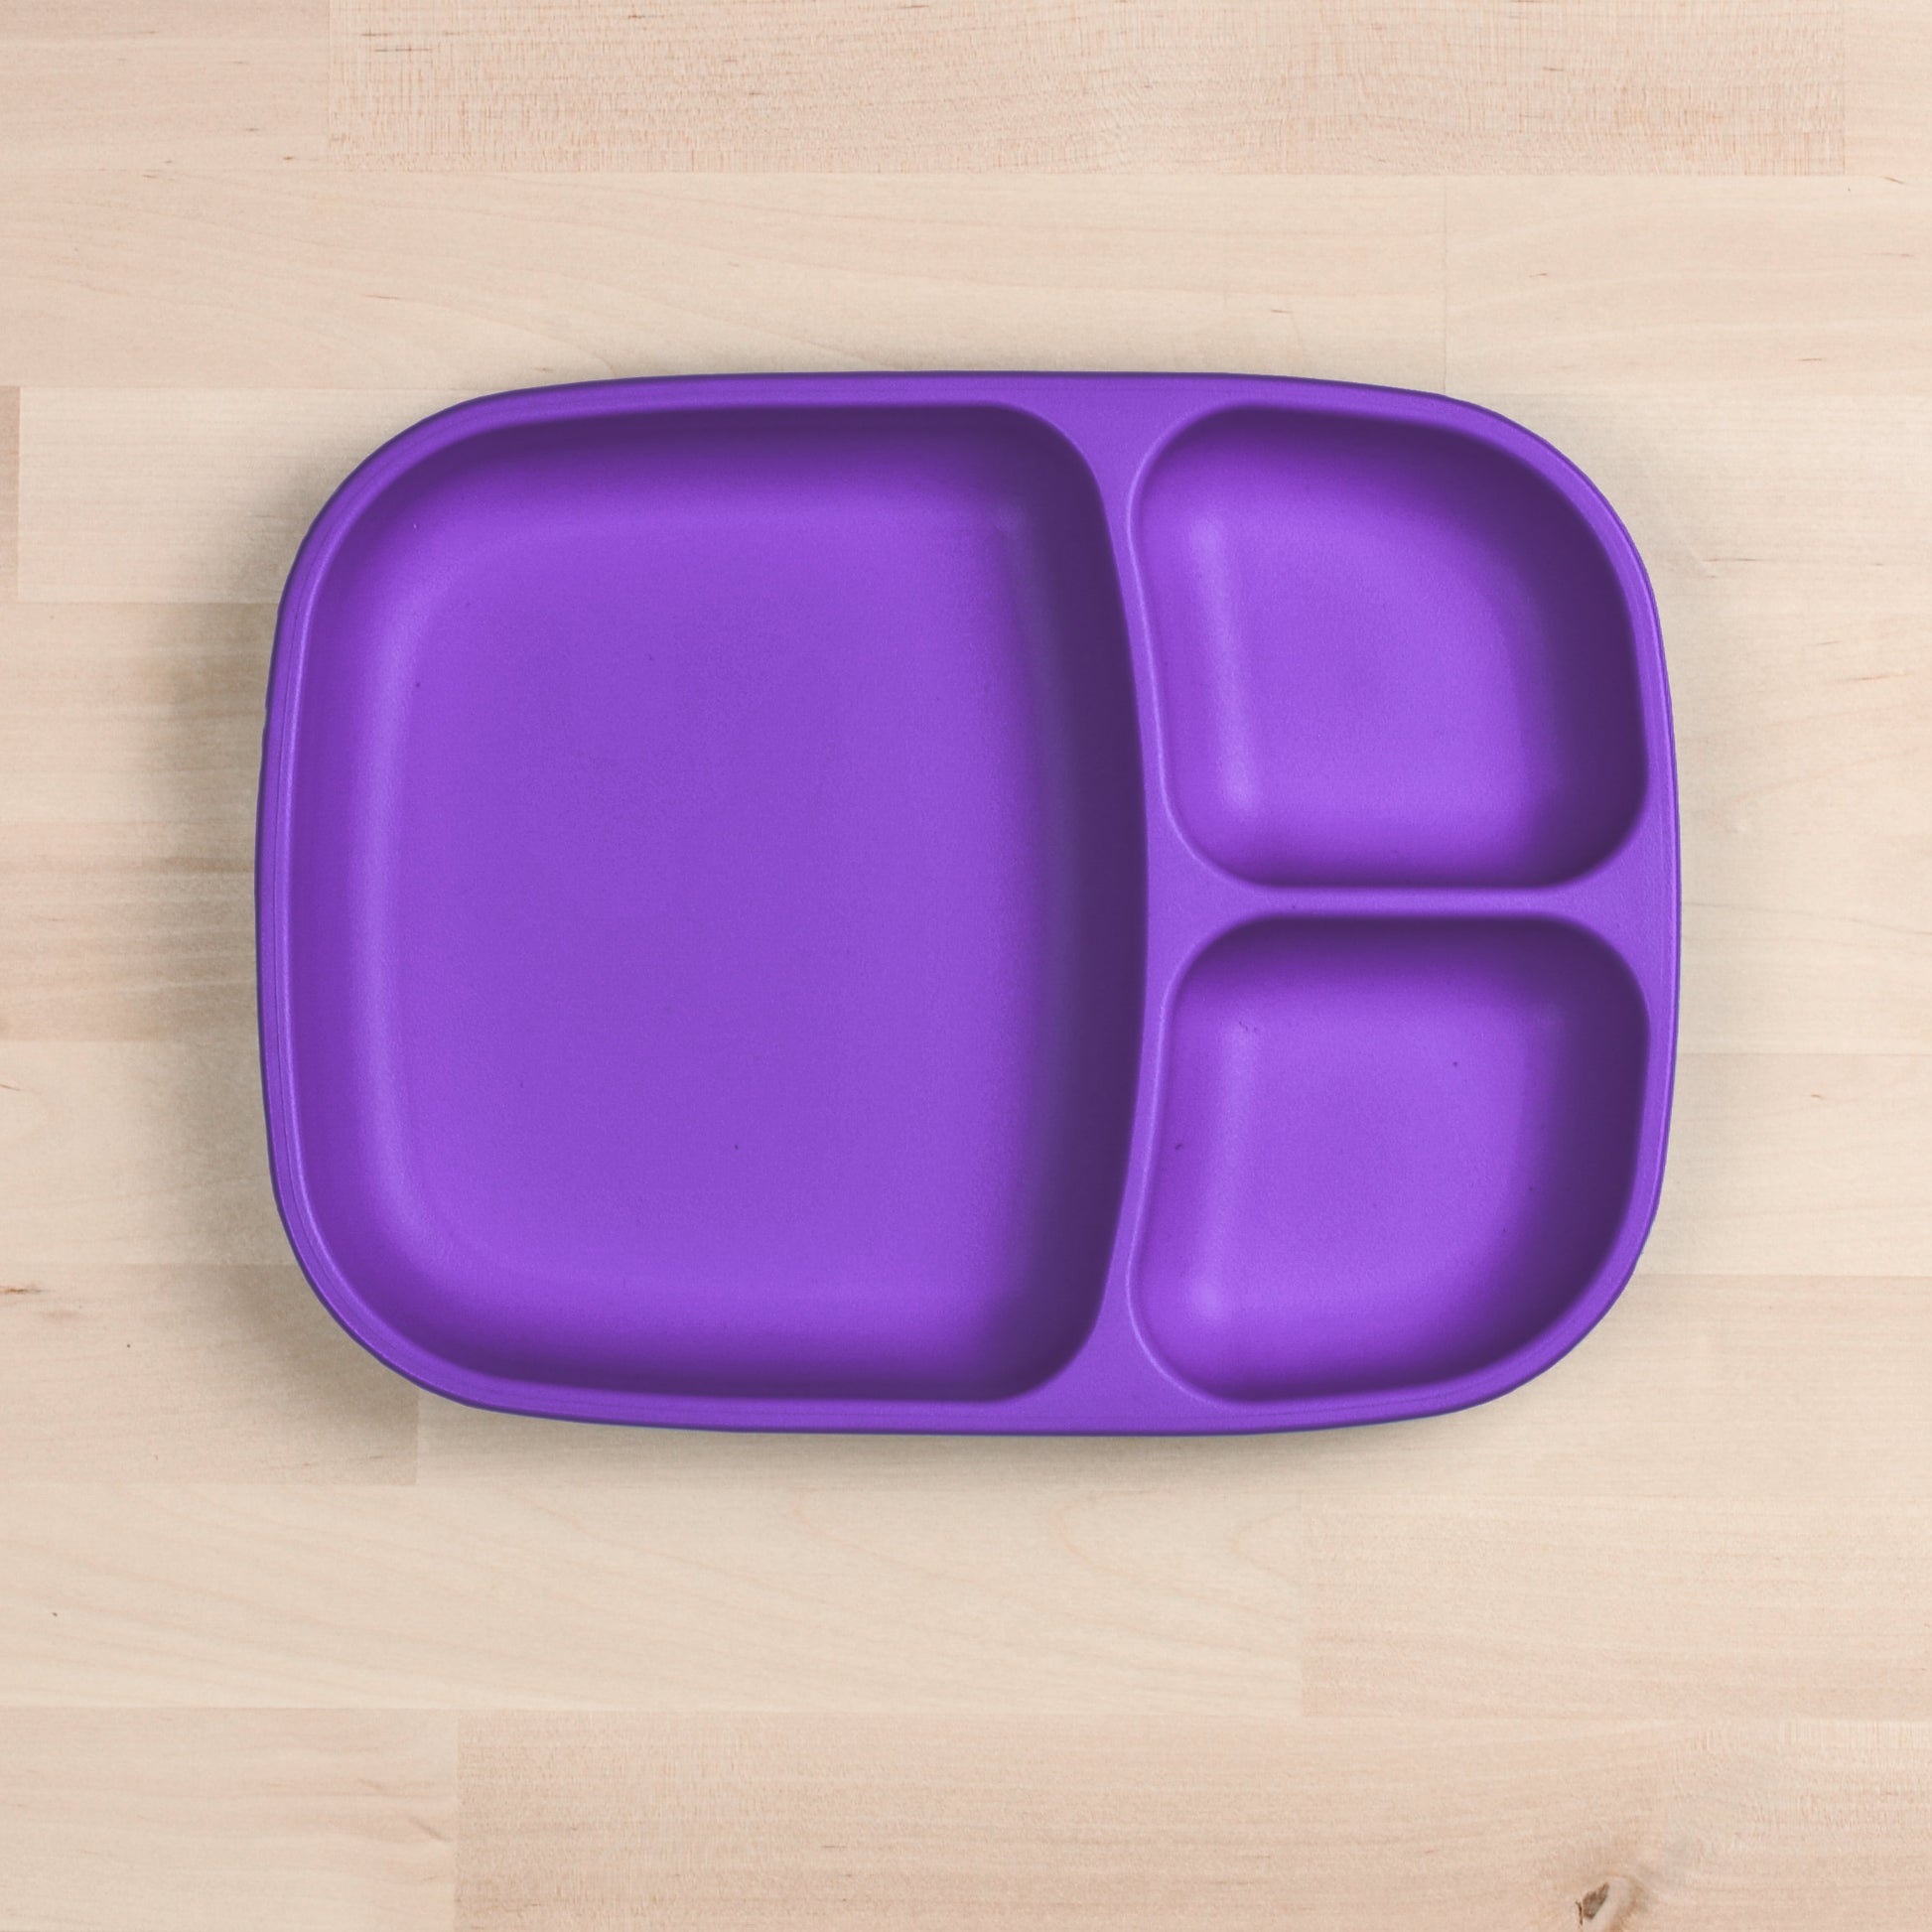 Re-Play Divided Tray in Amethyst from Bear & Moo